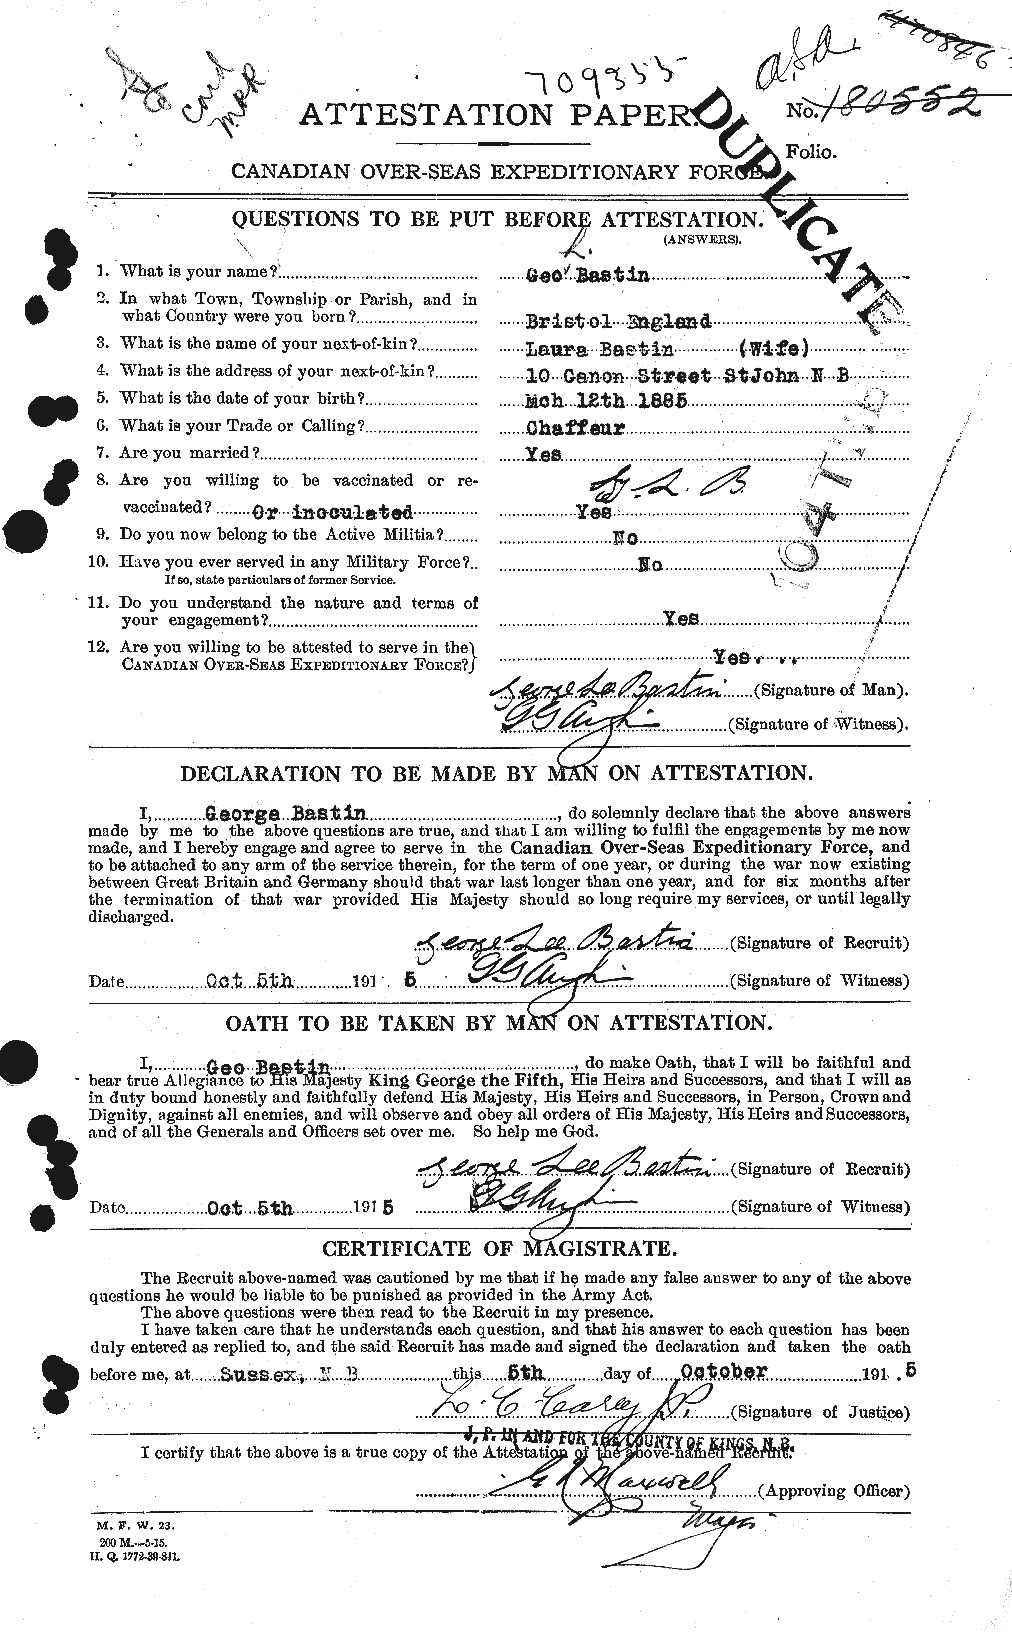 Personnel Records of the First World War - CEF 228214a